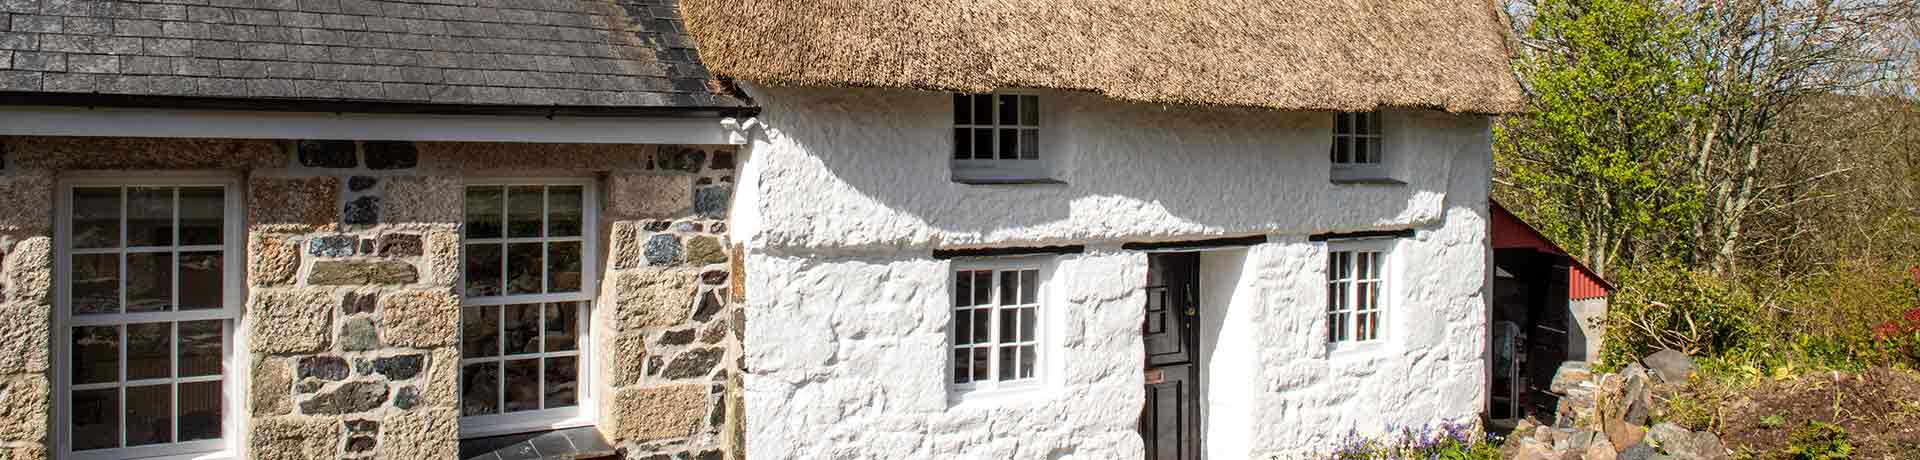 Cottages for 3 people in Wales